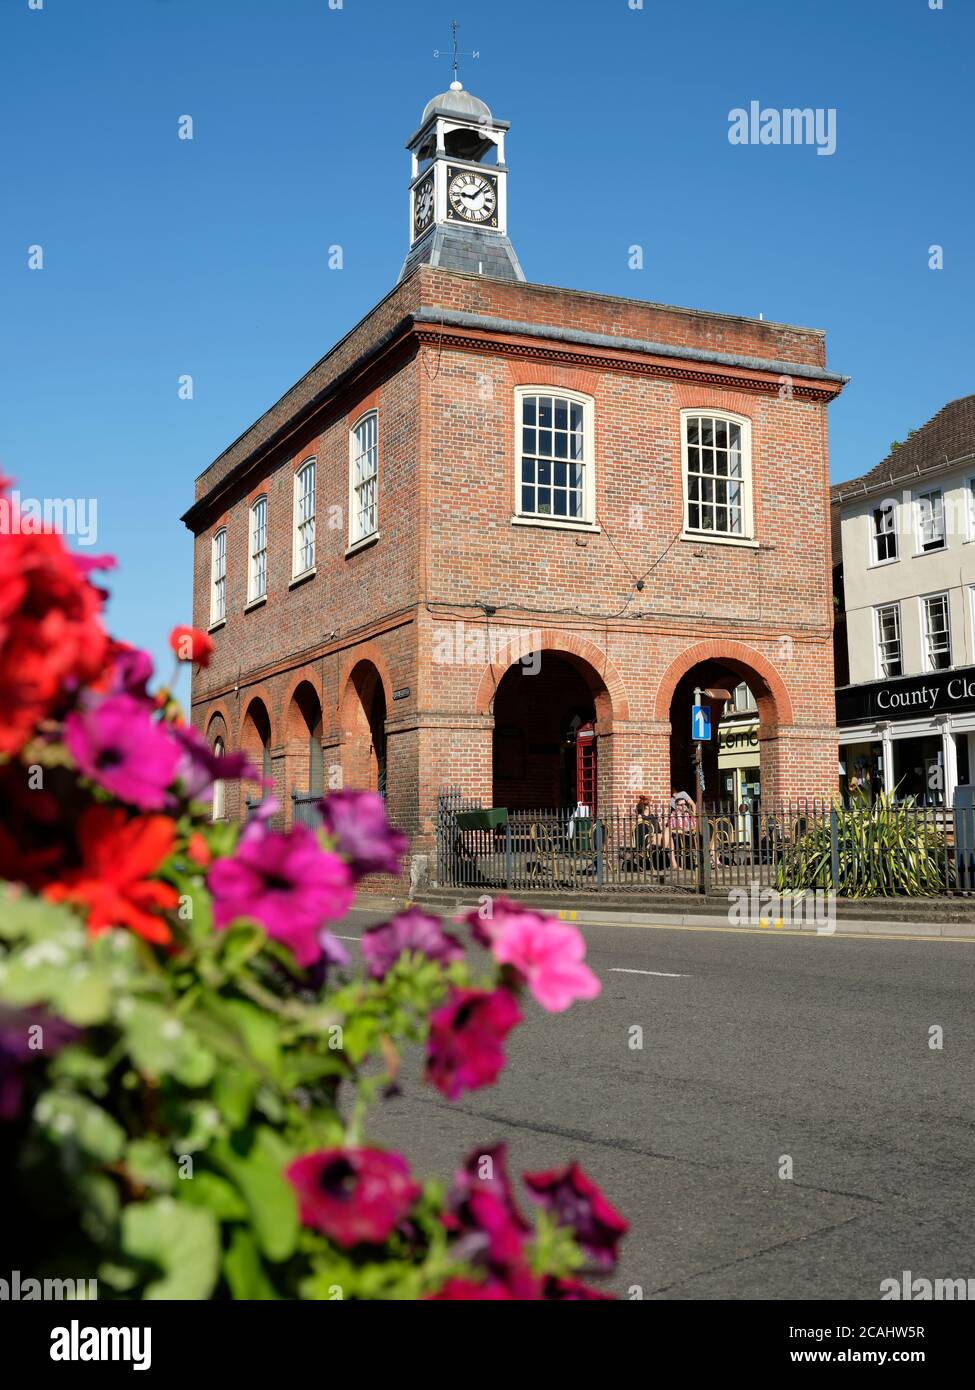 Reigate High Street and the Old Town Market Hall in Reigate Surrey England UK - Summer 2020 Stock Photo